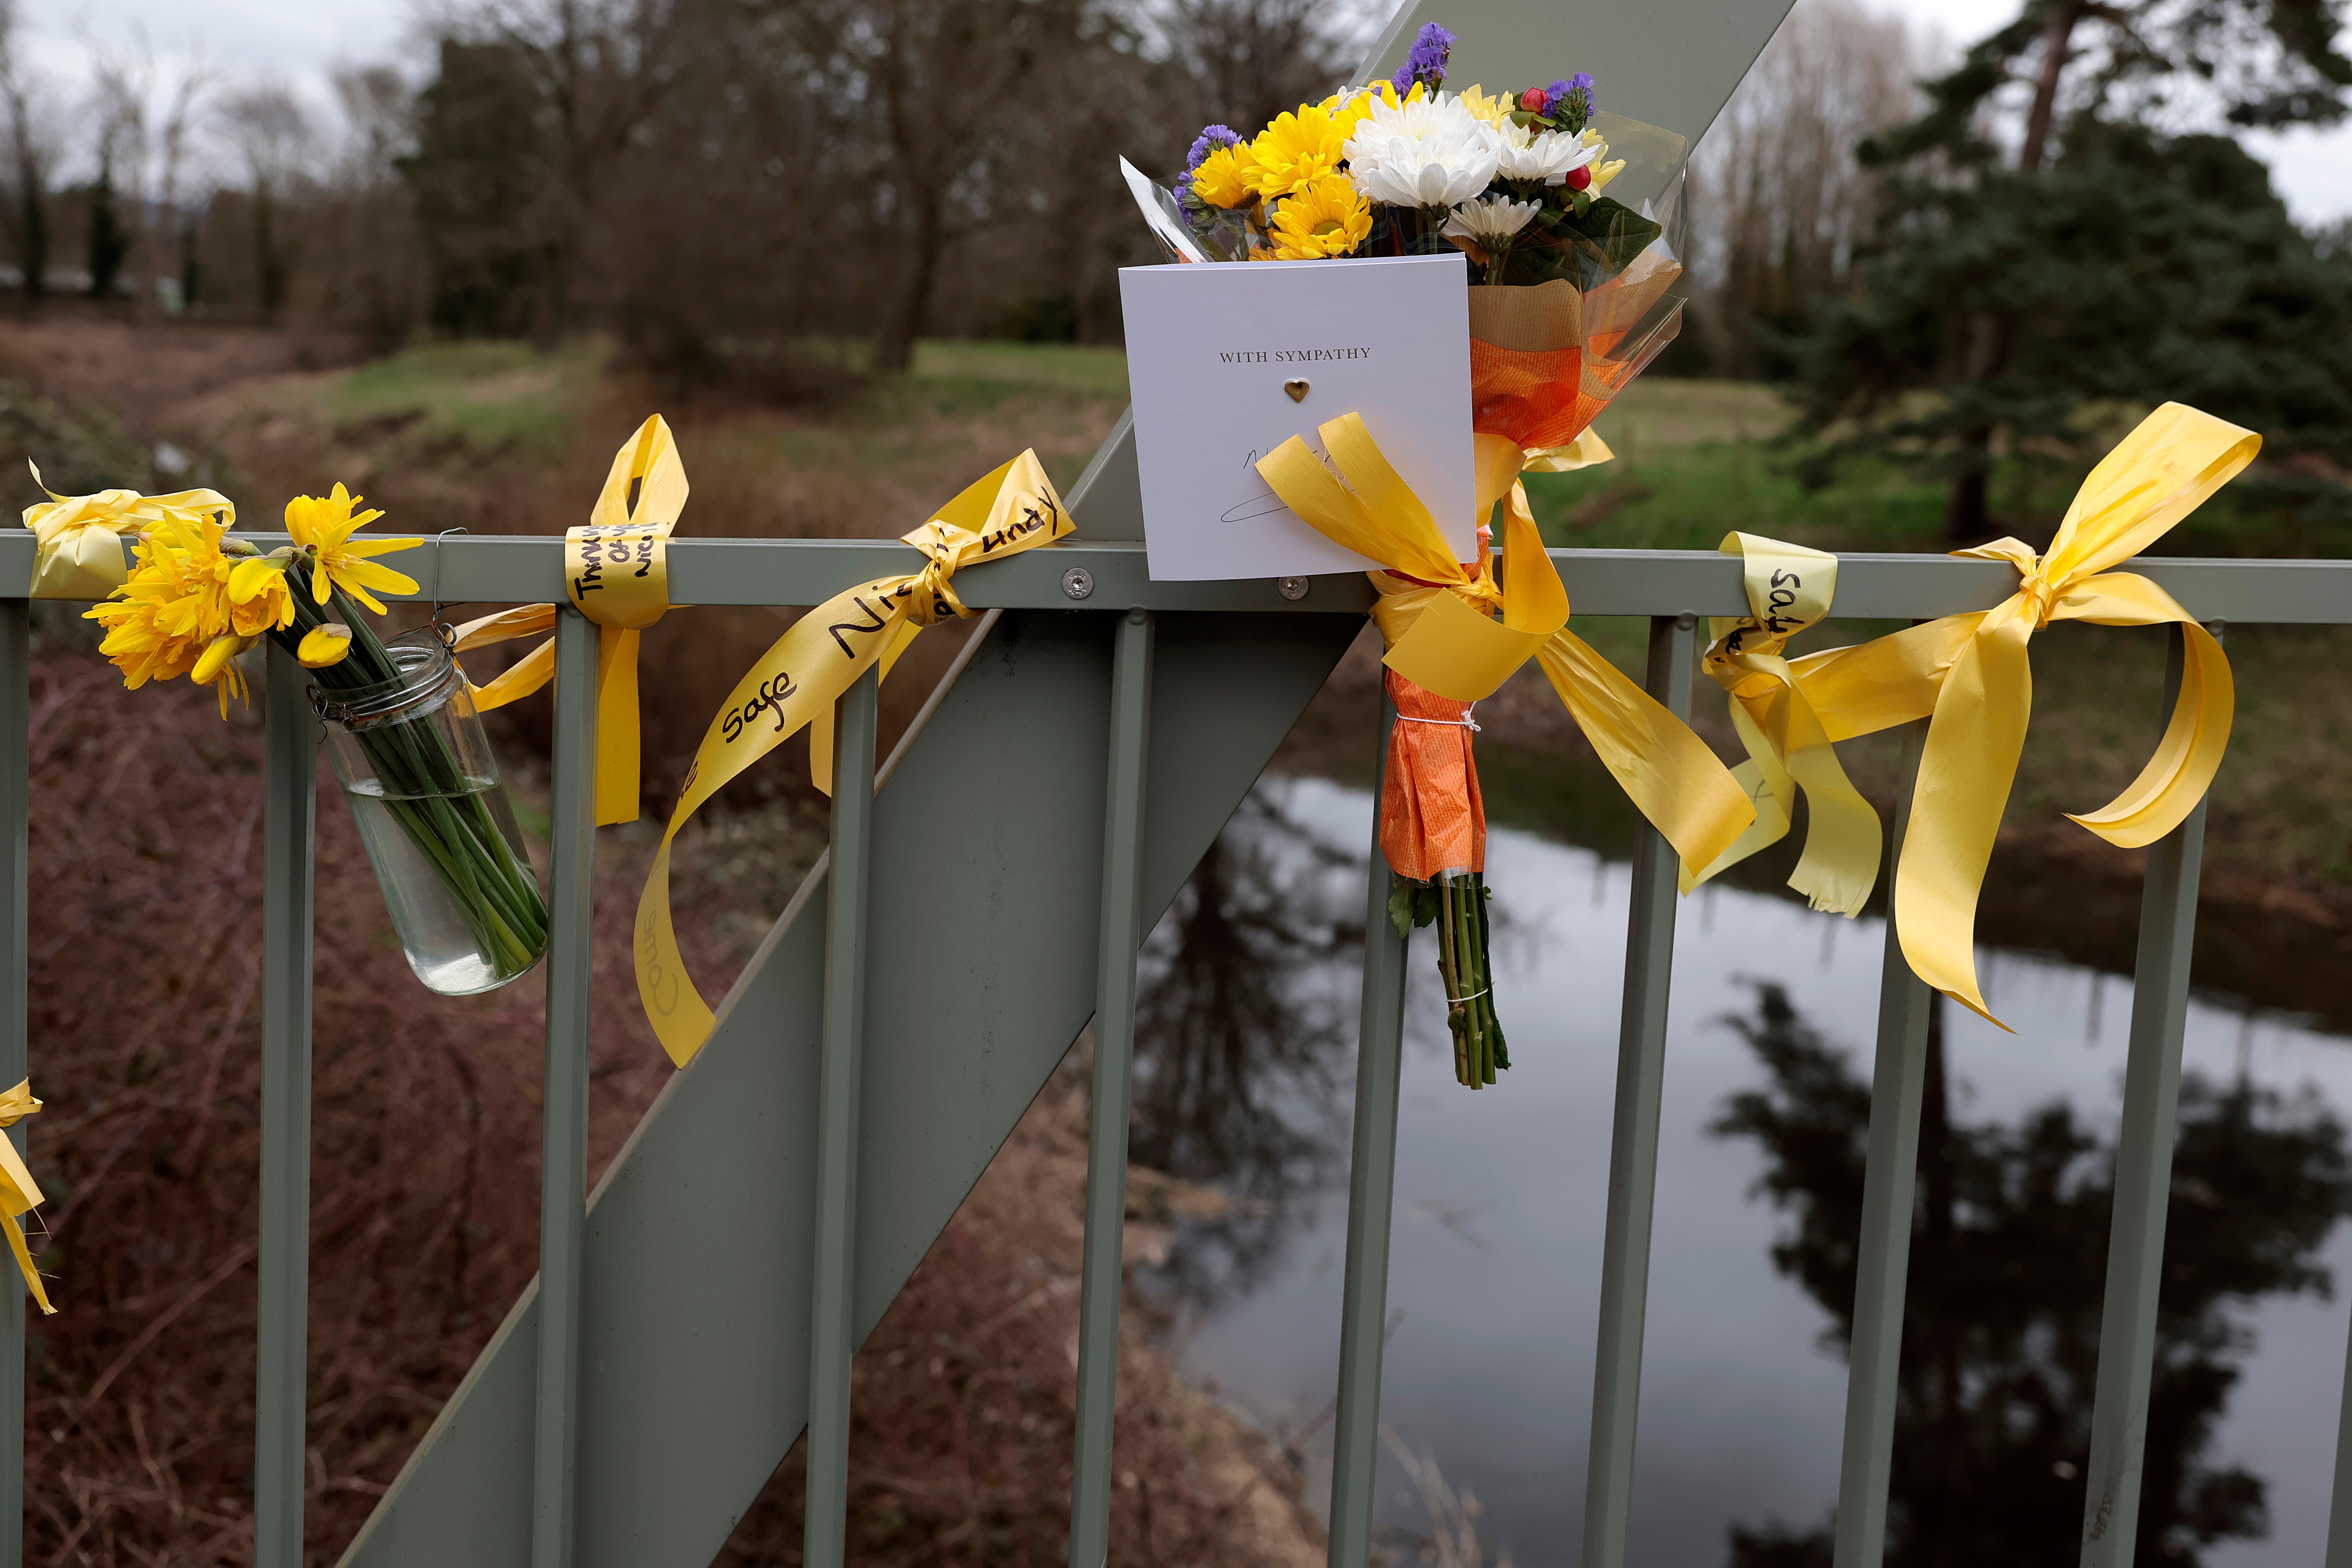 Flowers were left on a footbridge over the River Wyre in tribute